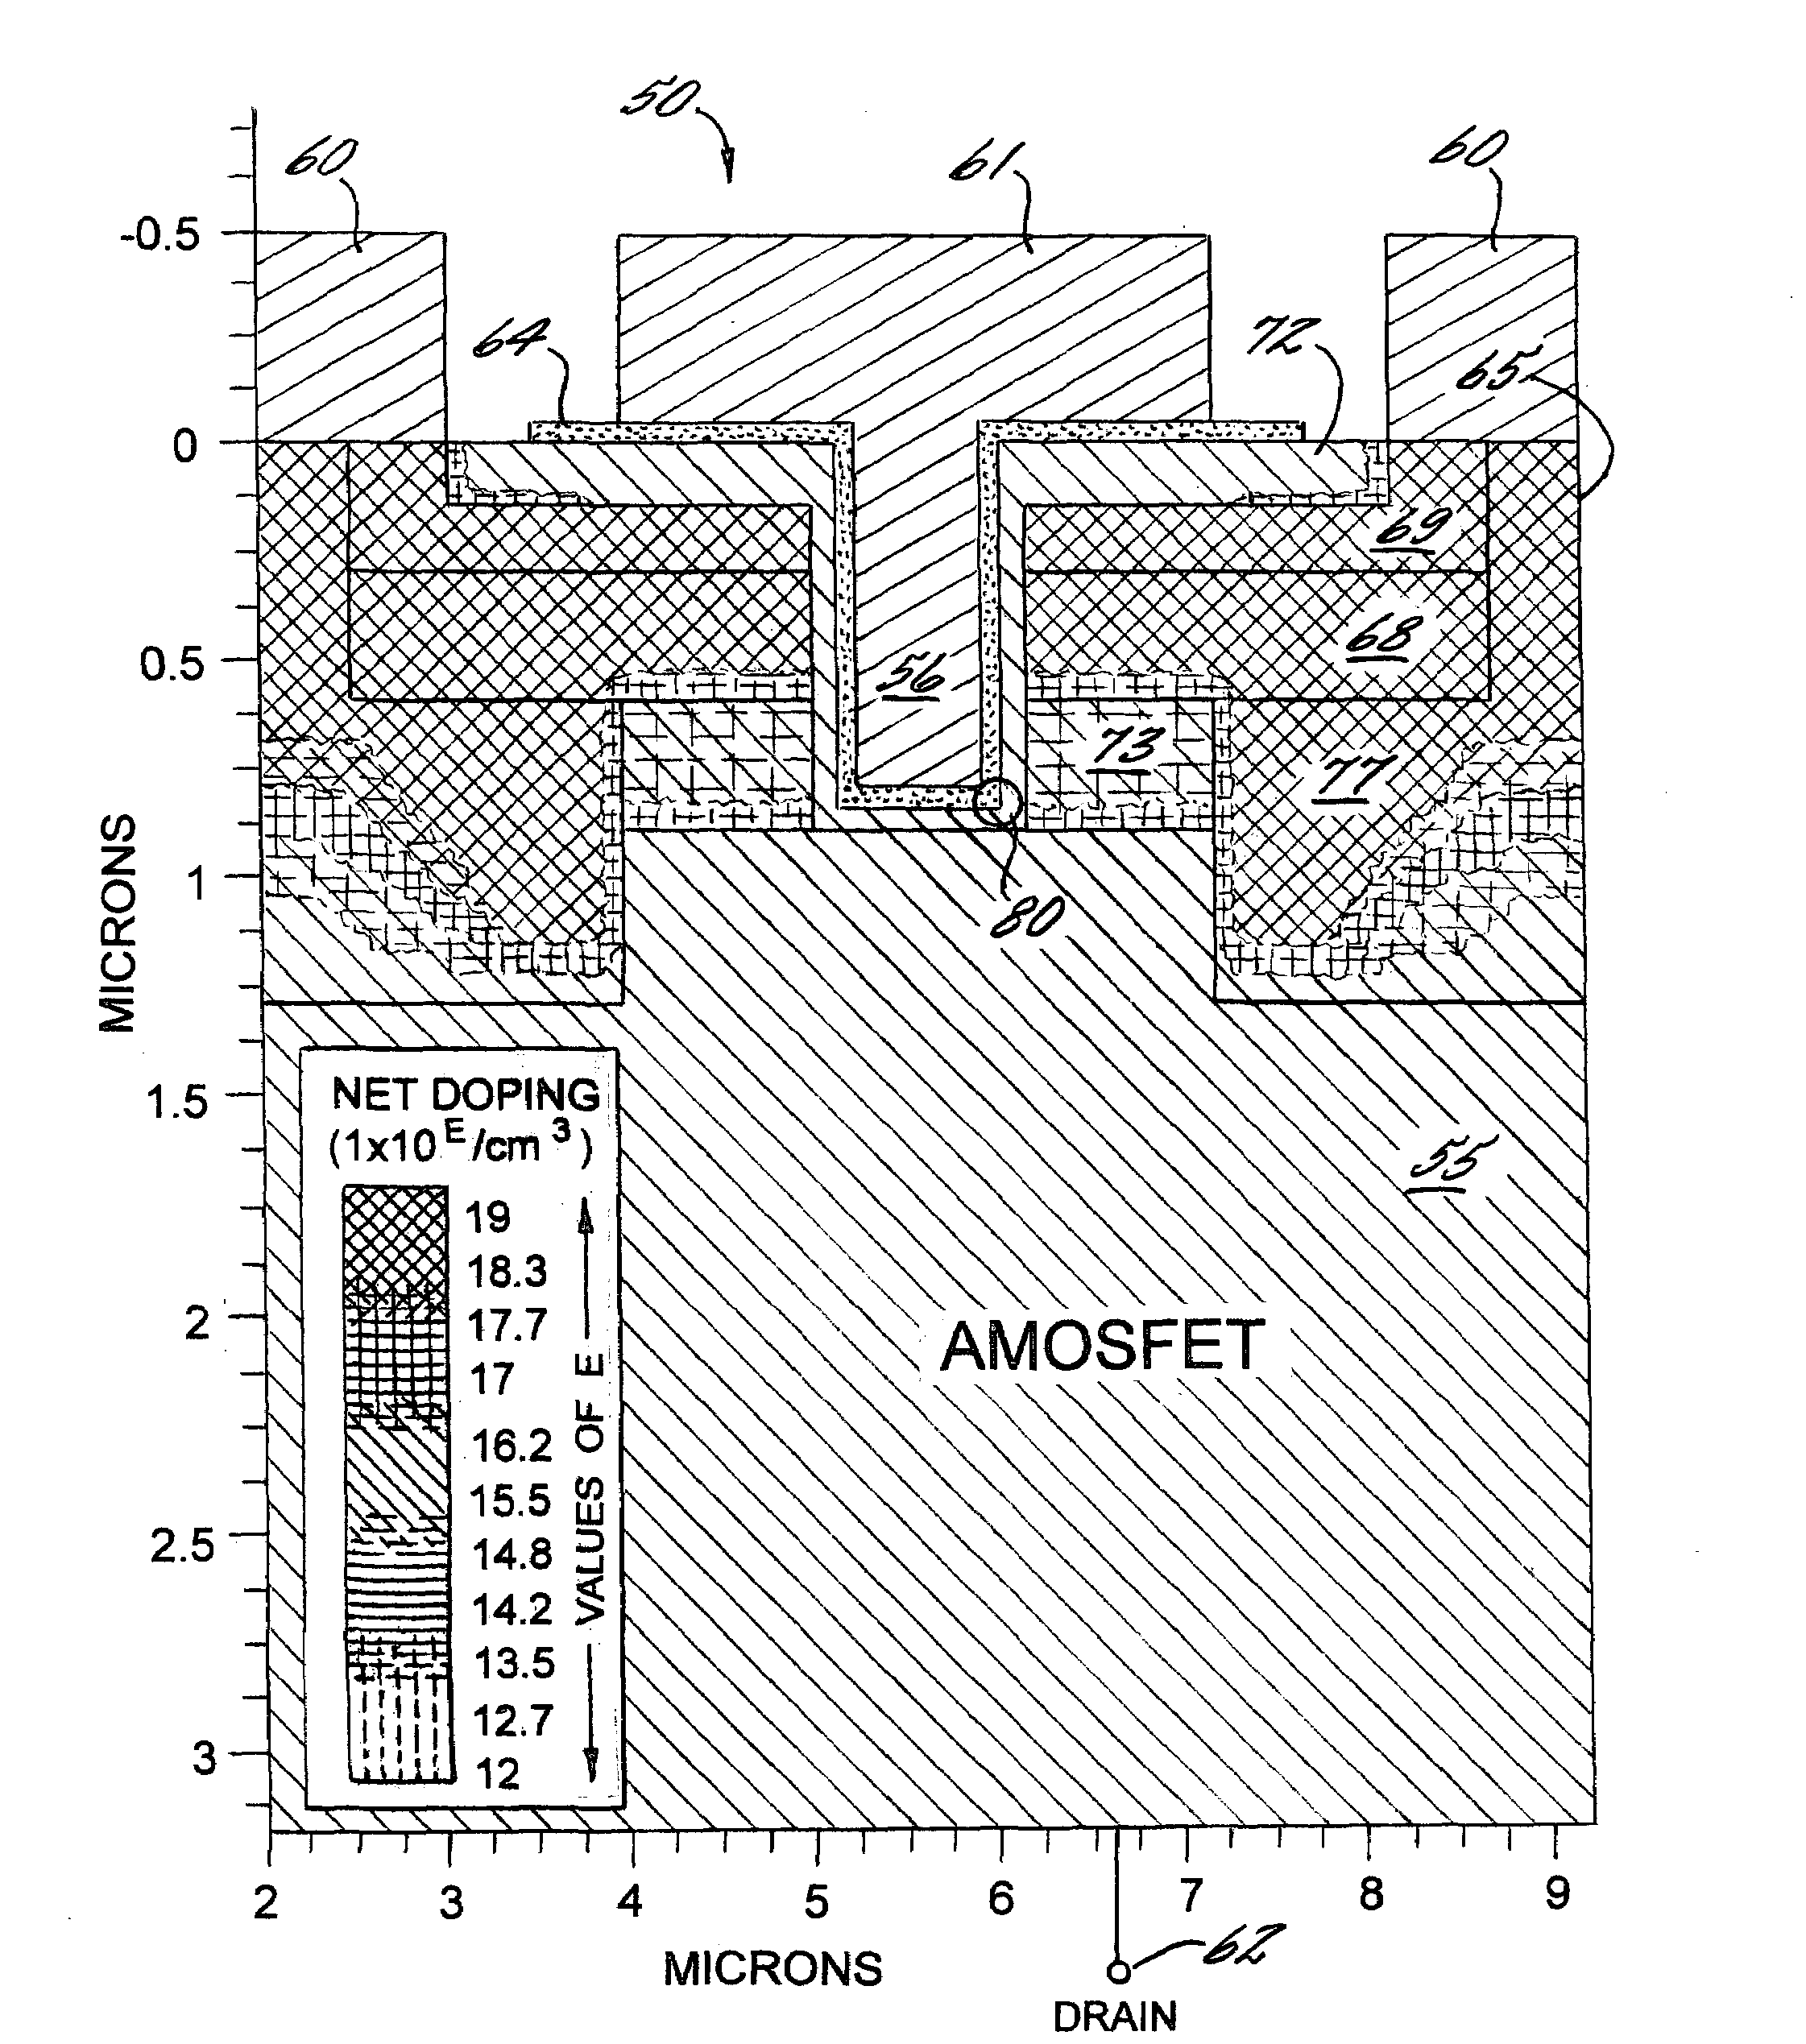 Transistor with A-Face Conductive Channel and Trench Protecting Well Region